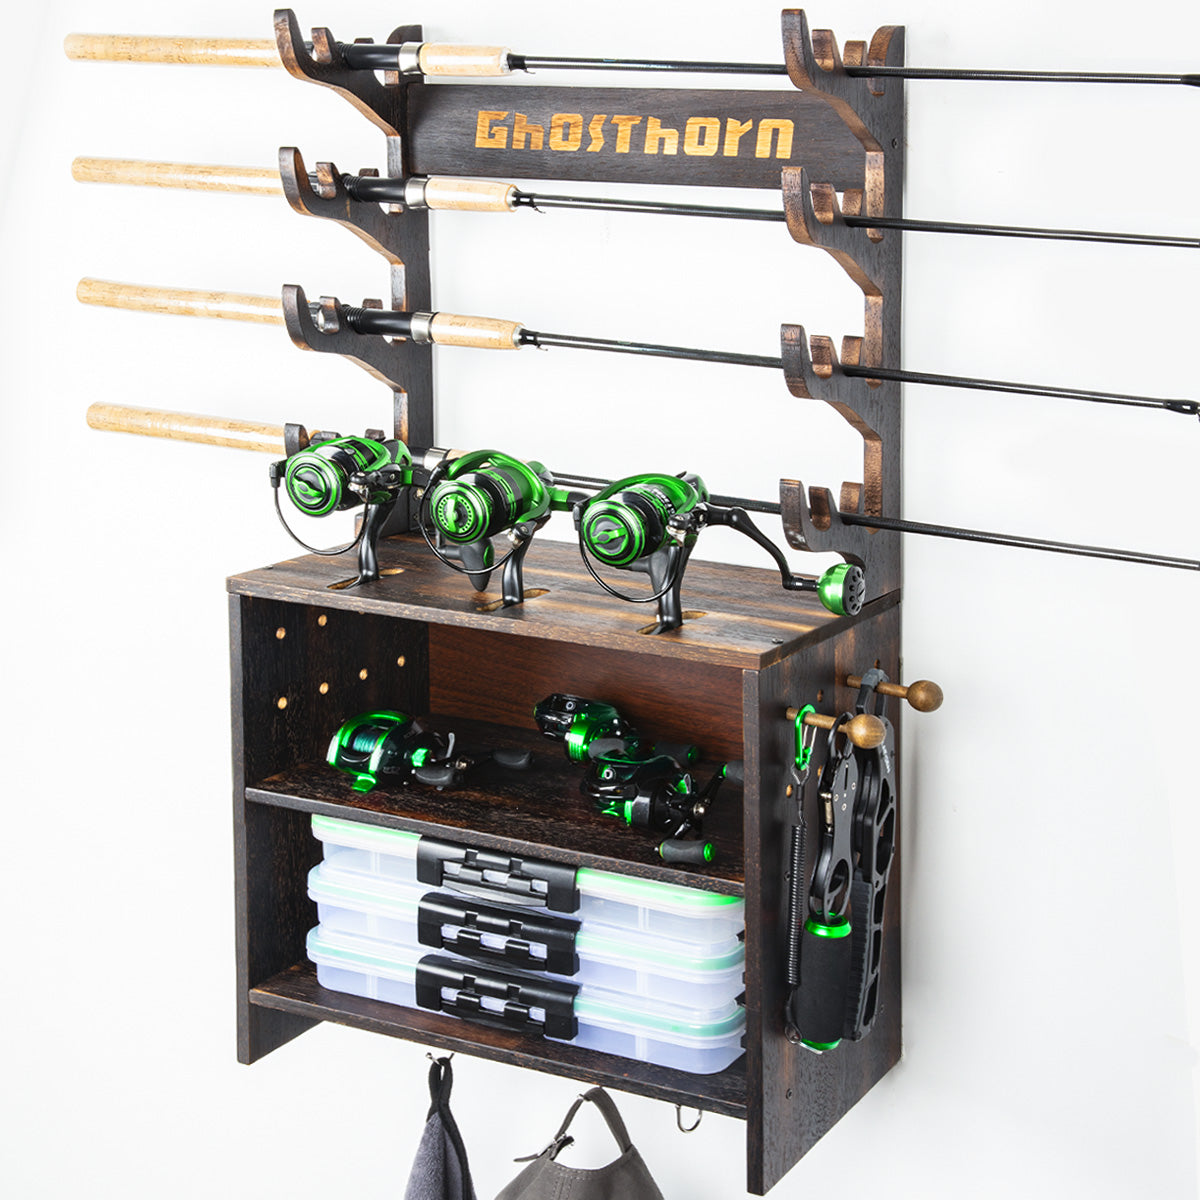 Fishing Rod Holder, Portable Fishing Rod Storage Rack Fishing Accessories,  Fishing Gear Fishing Pole Holder Holds up to 12 Rods or Combos, All in One